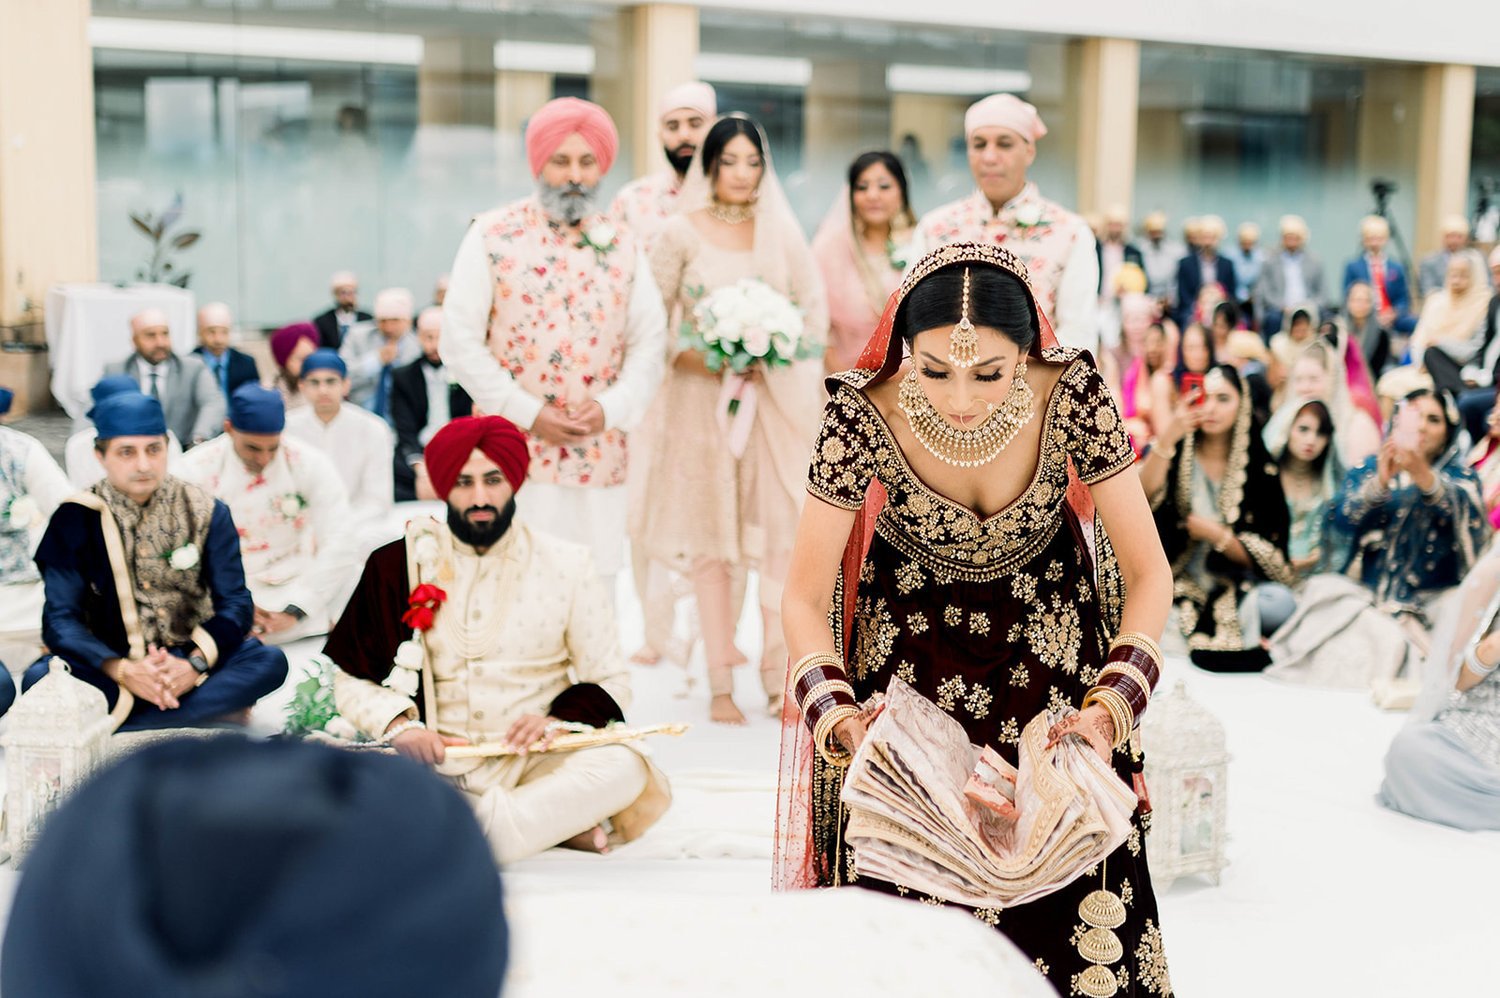 An indian bride makes an offering at the alter of a Sikh wedding in Victoria BC 